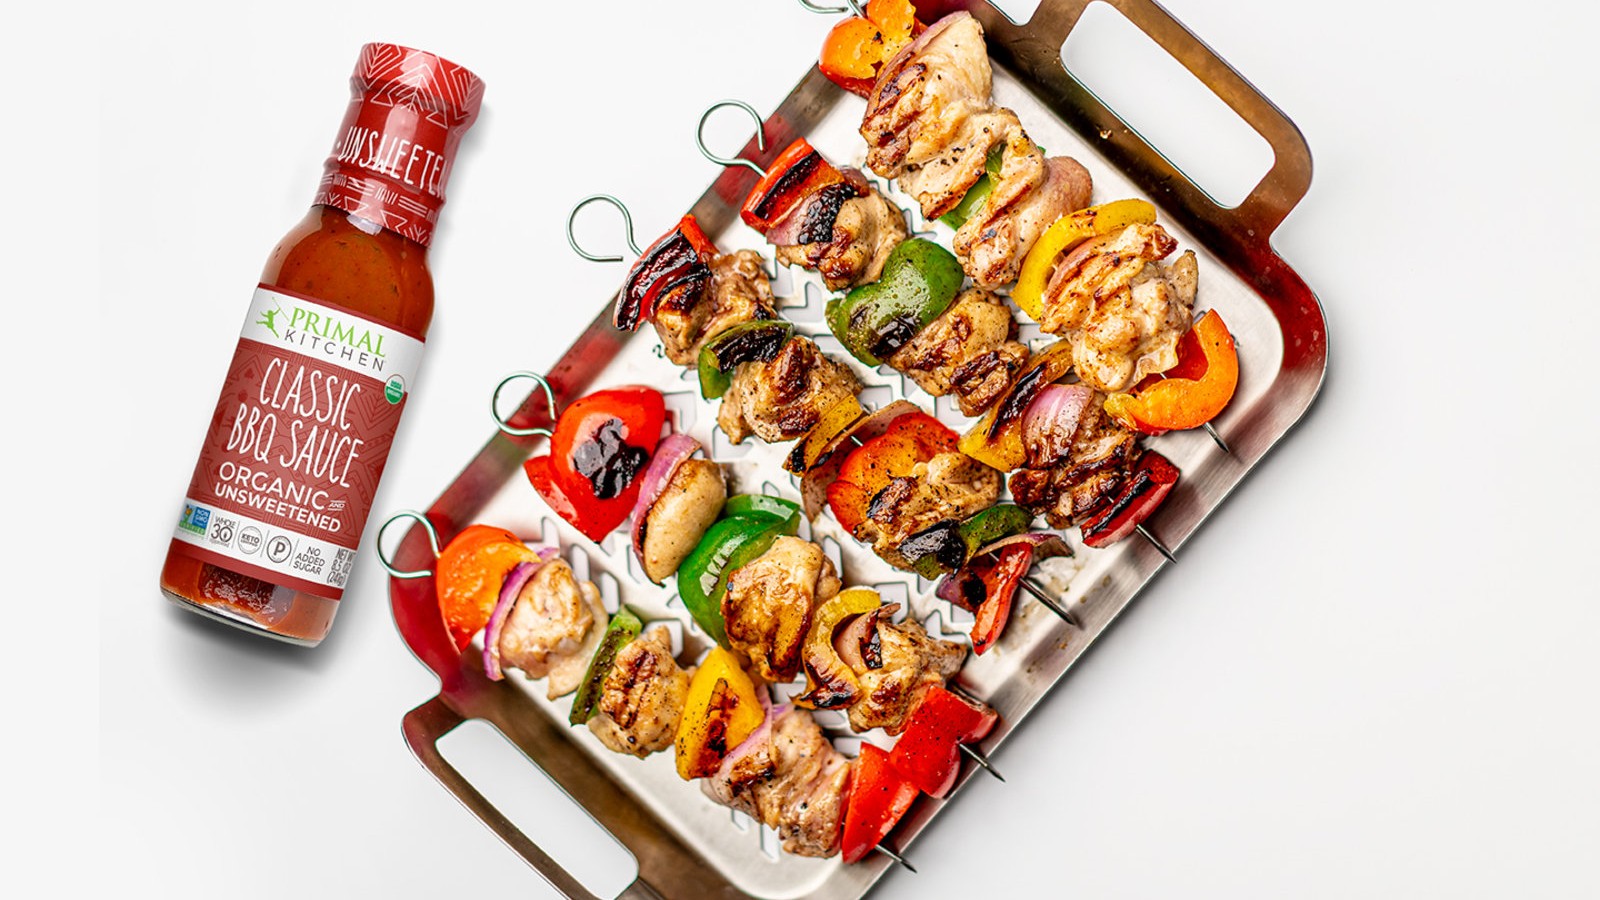 Image of Grilled Chicken Kabobs with Vegetables